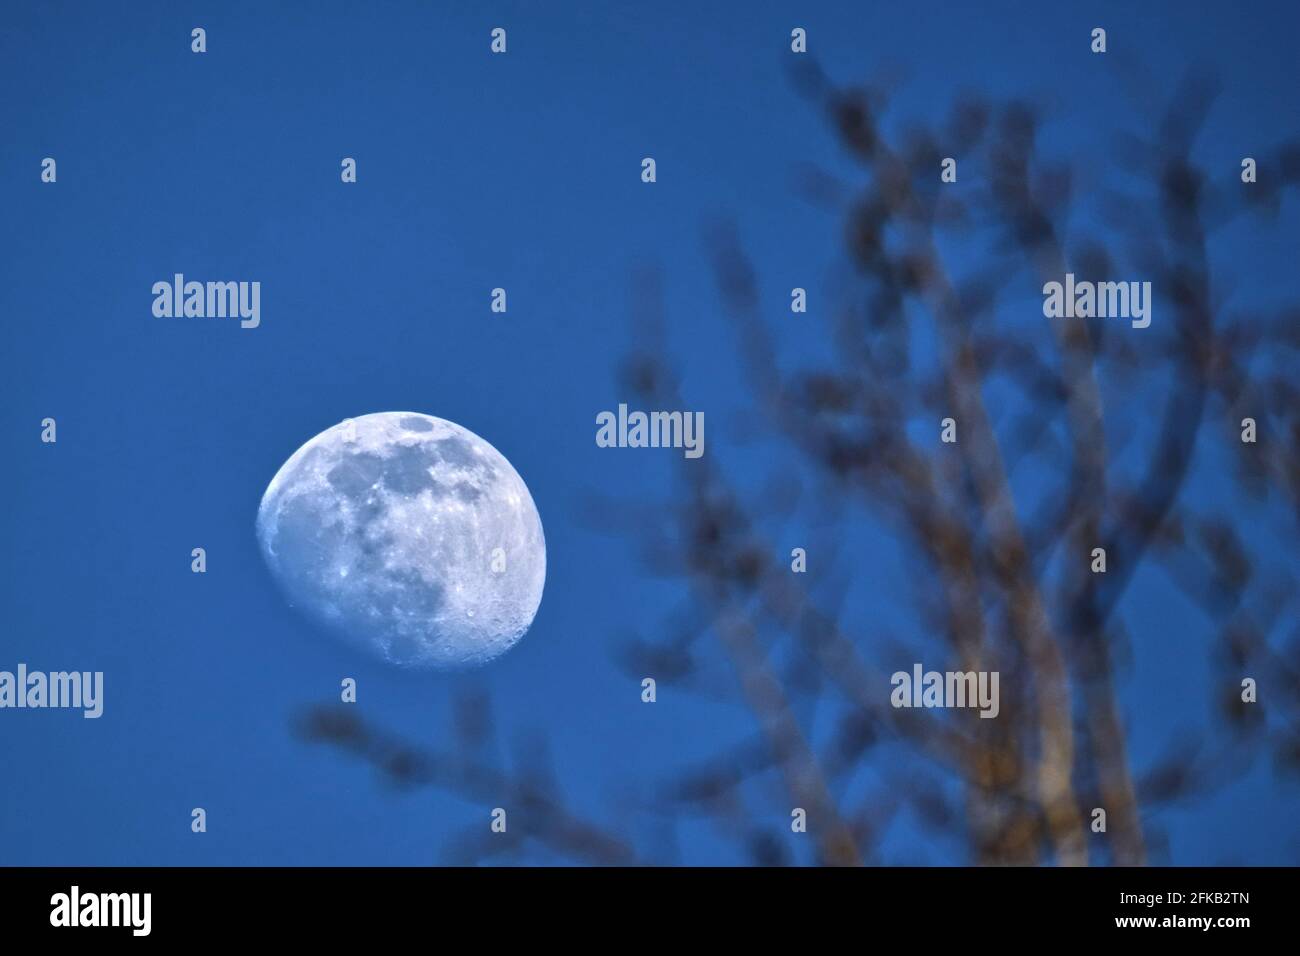 scenice view of the moon behind twigs and branches at night Stock Photo